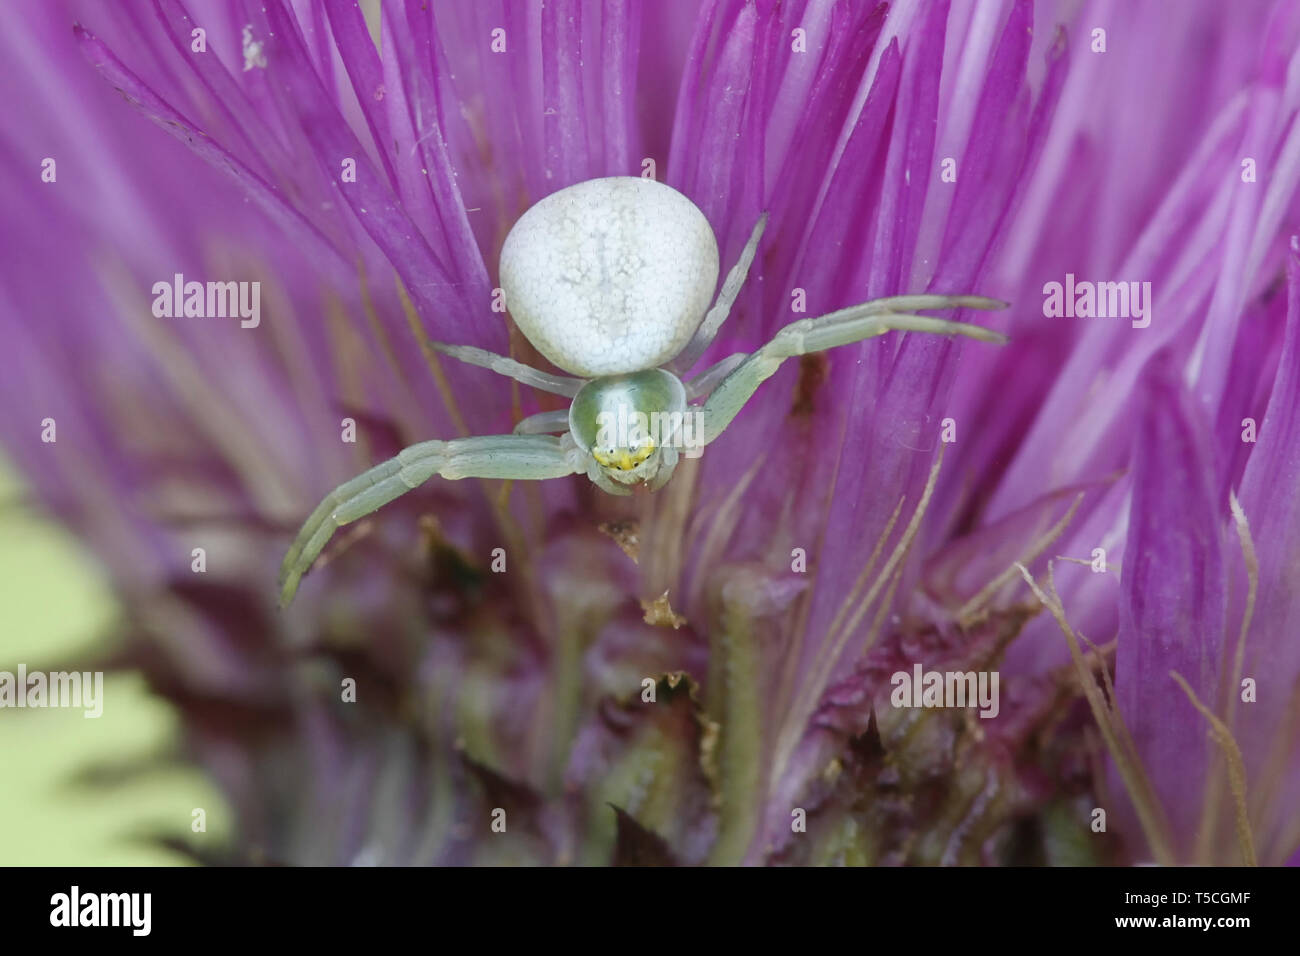 Goldenrod crab spider or flower crab spider, Misumena vatia, hunting on blooming plume thistle in Finland Stock Photo